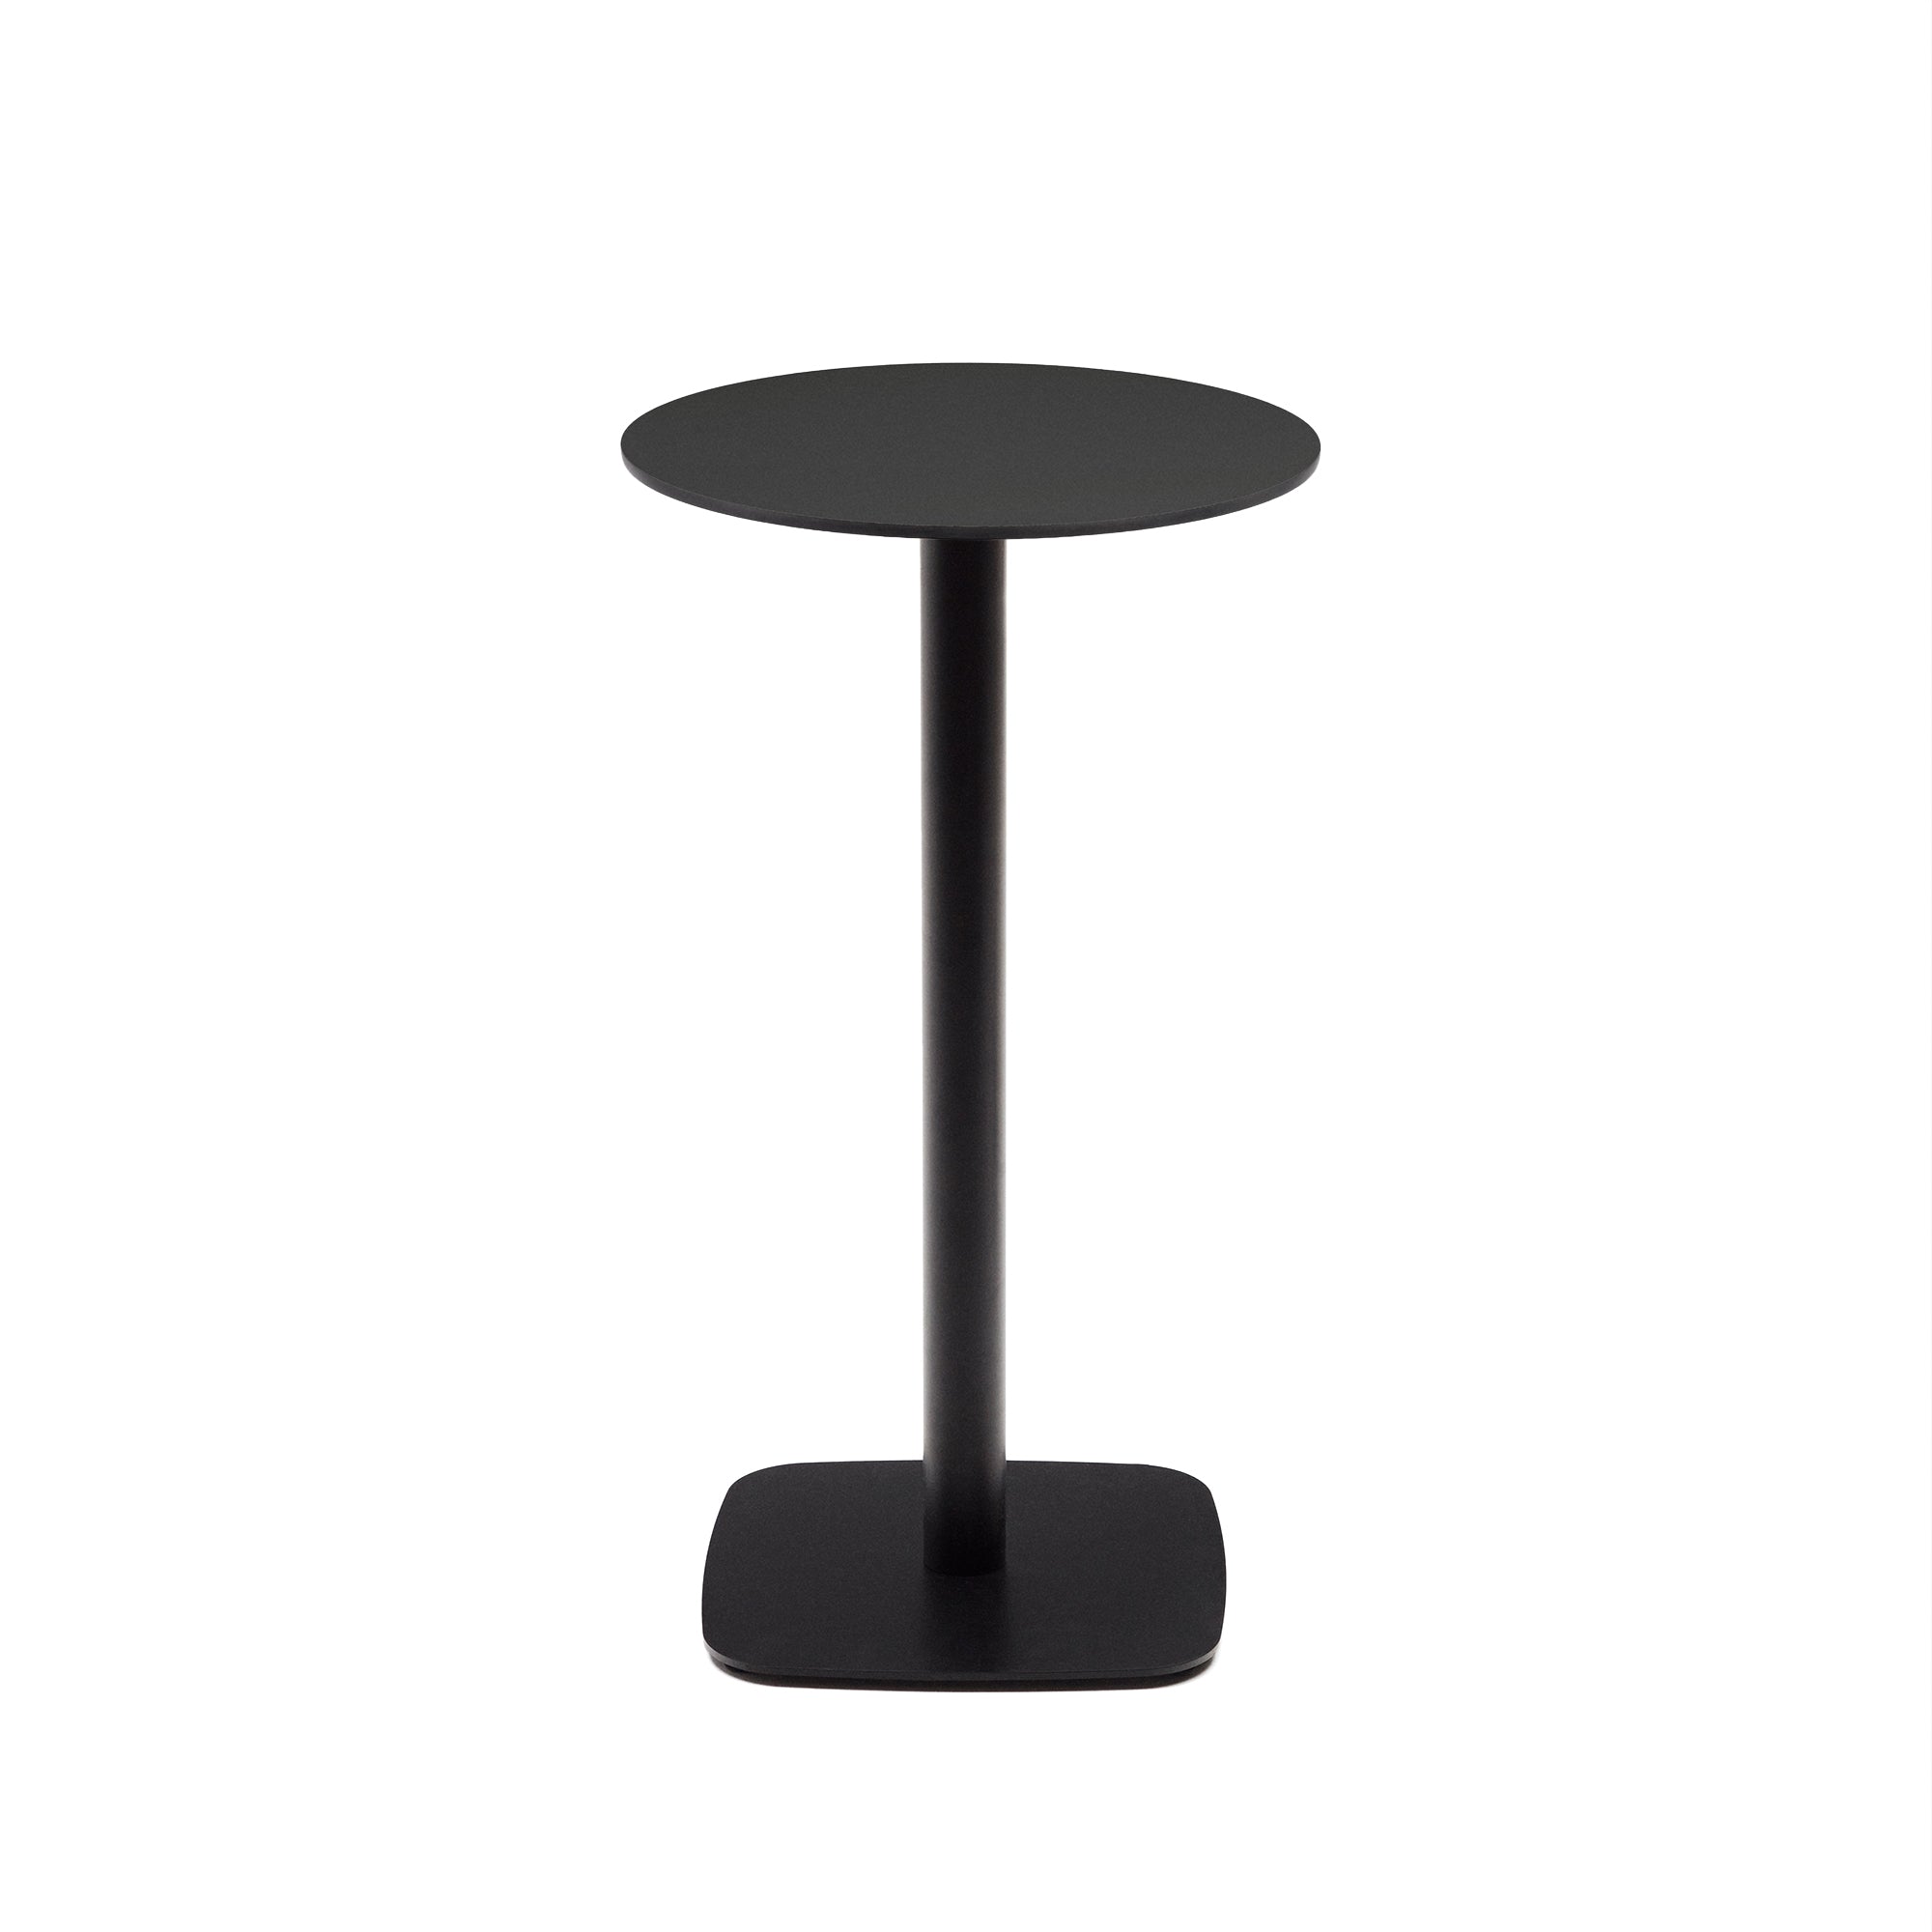 Dina high round outdoor table in black with metal leg in a painted black finish, Ø 60x96 cm